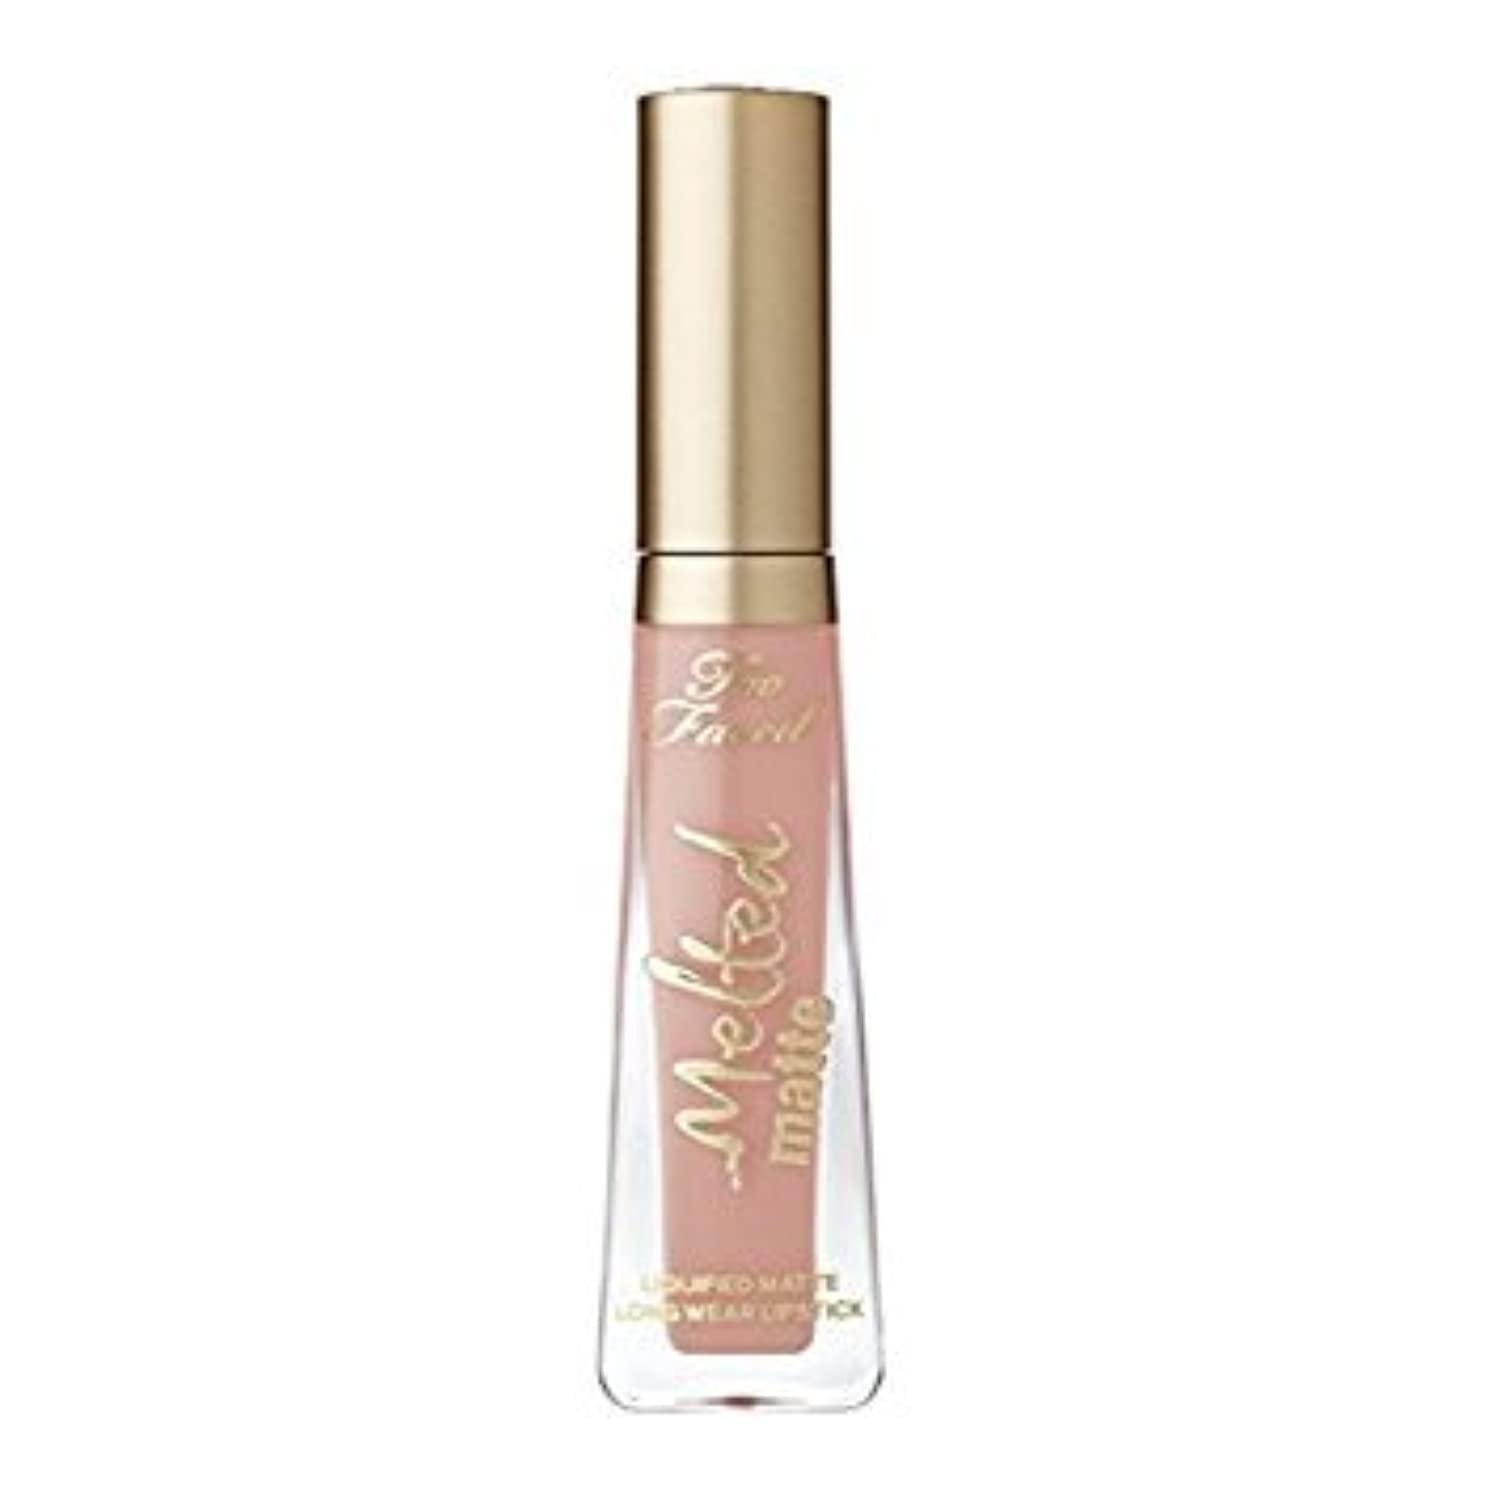 Too Faced Liquified Long Wear Lipstick - Holy Chic!